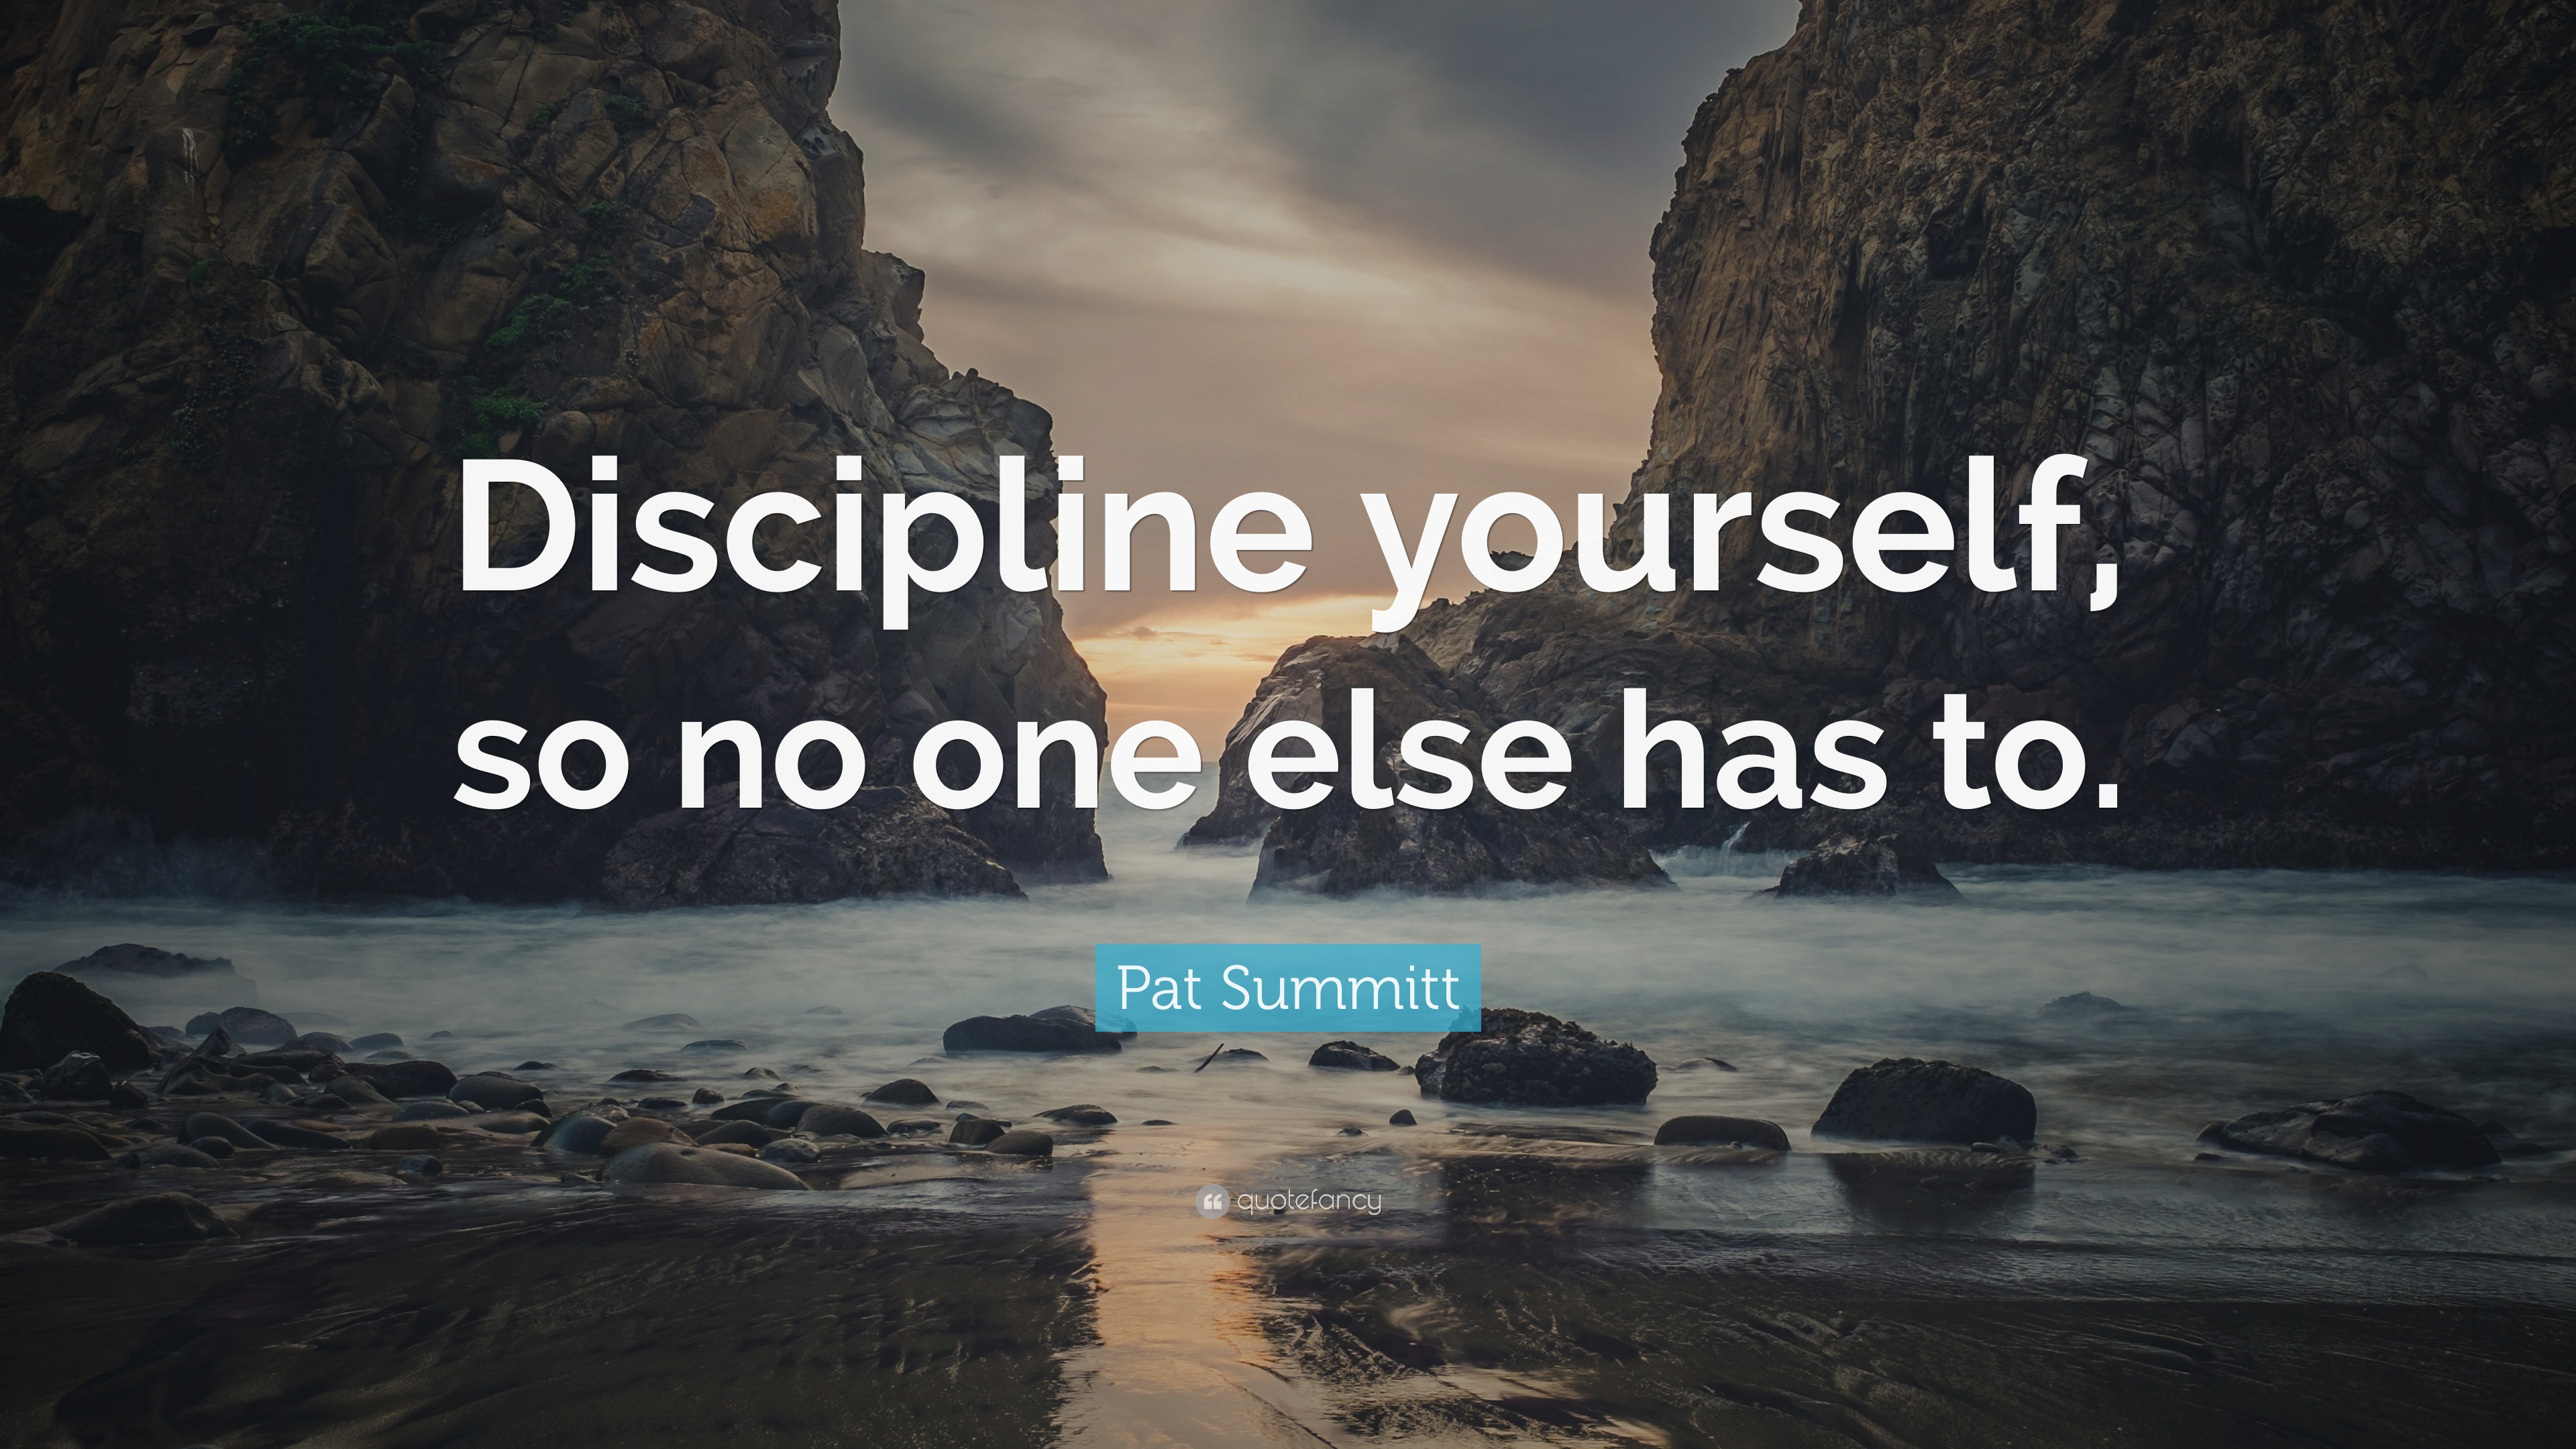 Pat Summitt Quote: “Discipline yourself, so no one else has to.”